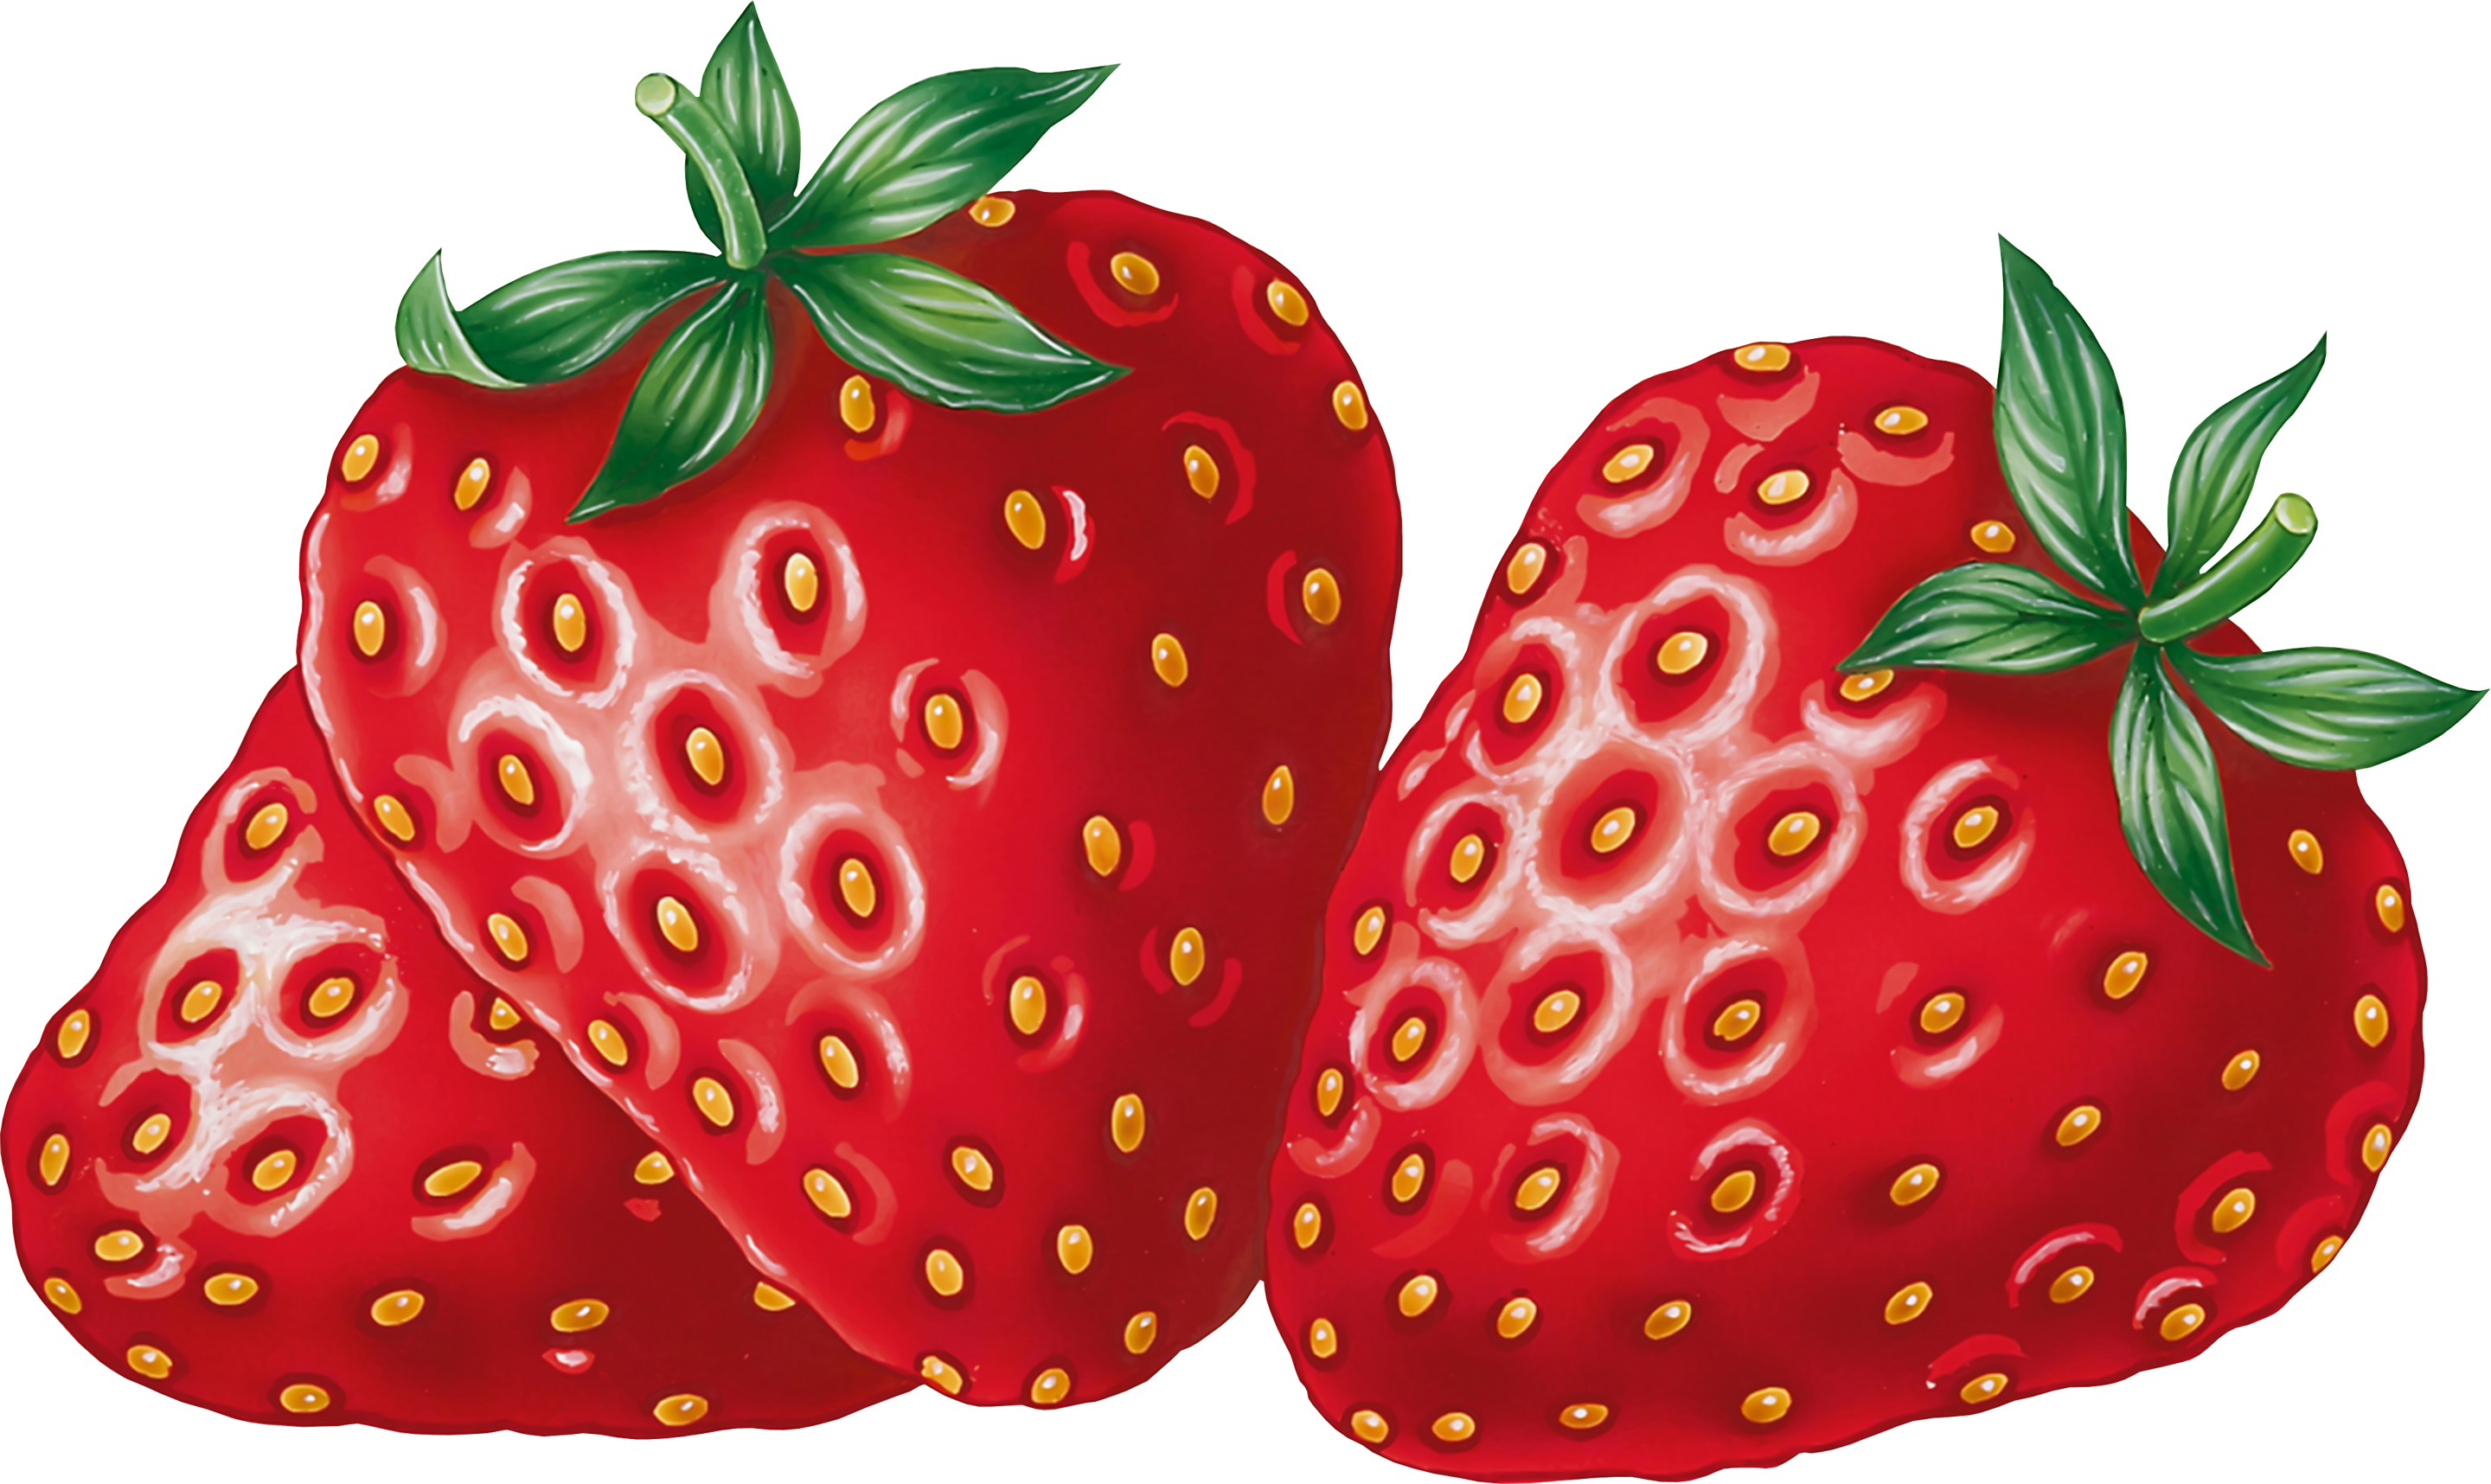 Strawberry Png Images - Strawberry, Transparent background PNG HD thumbnail